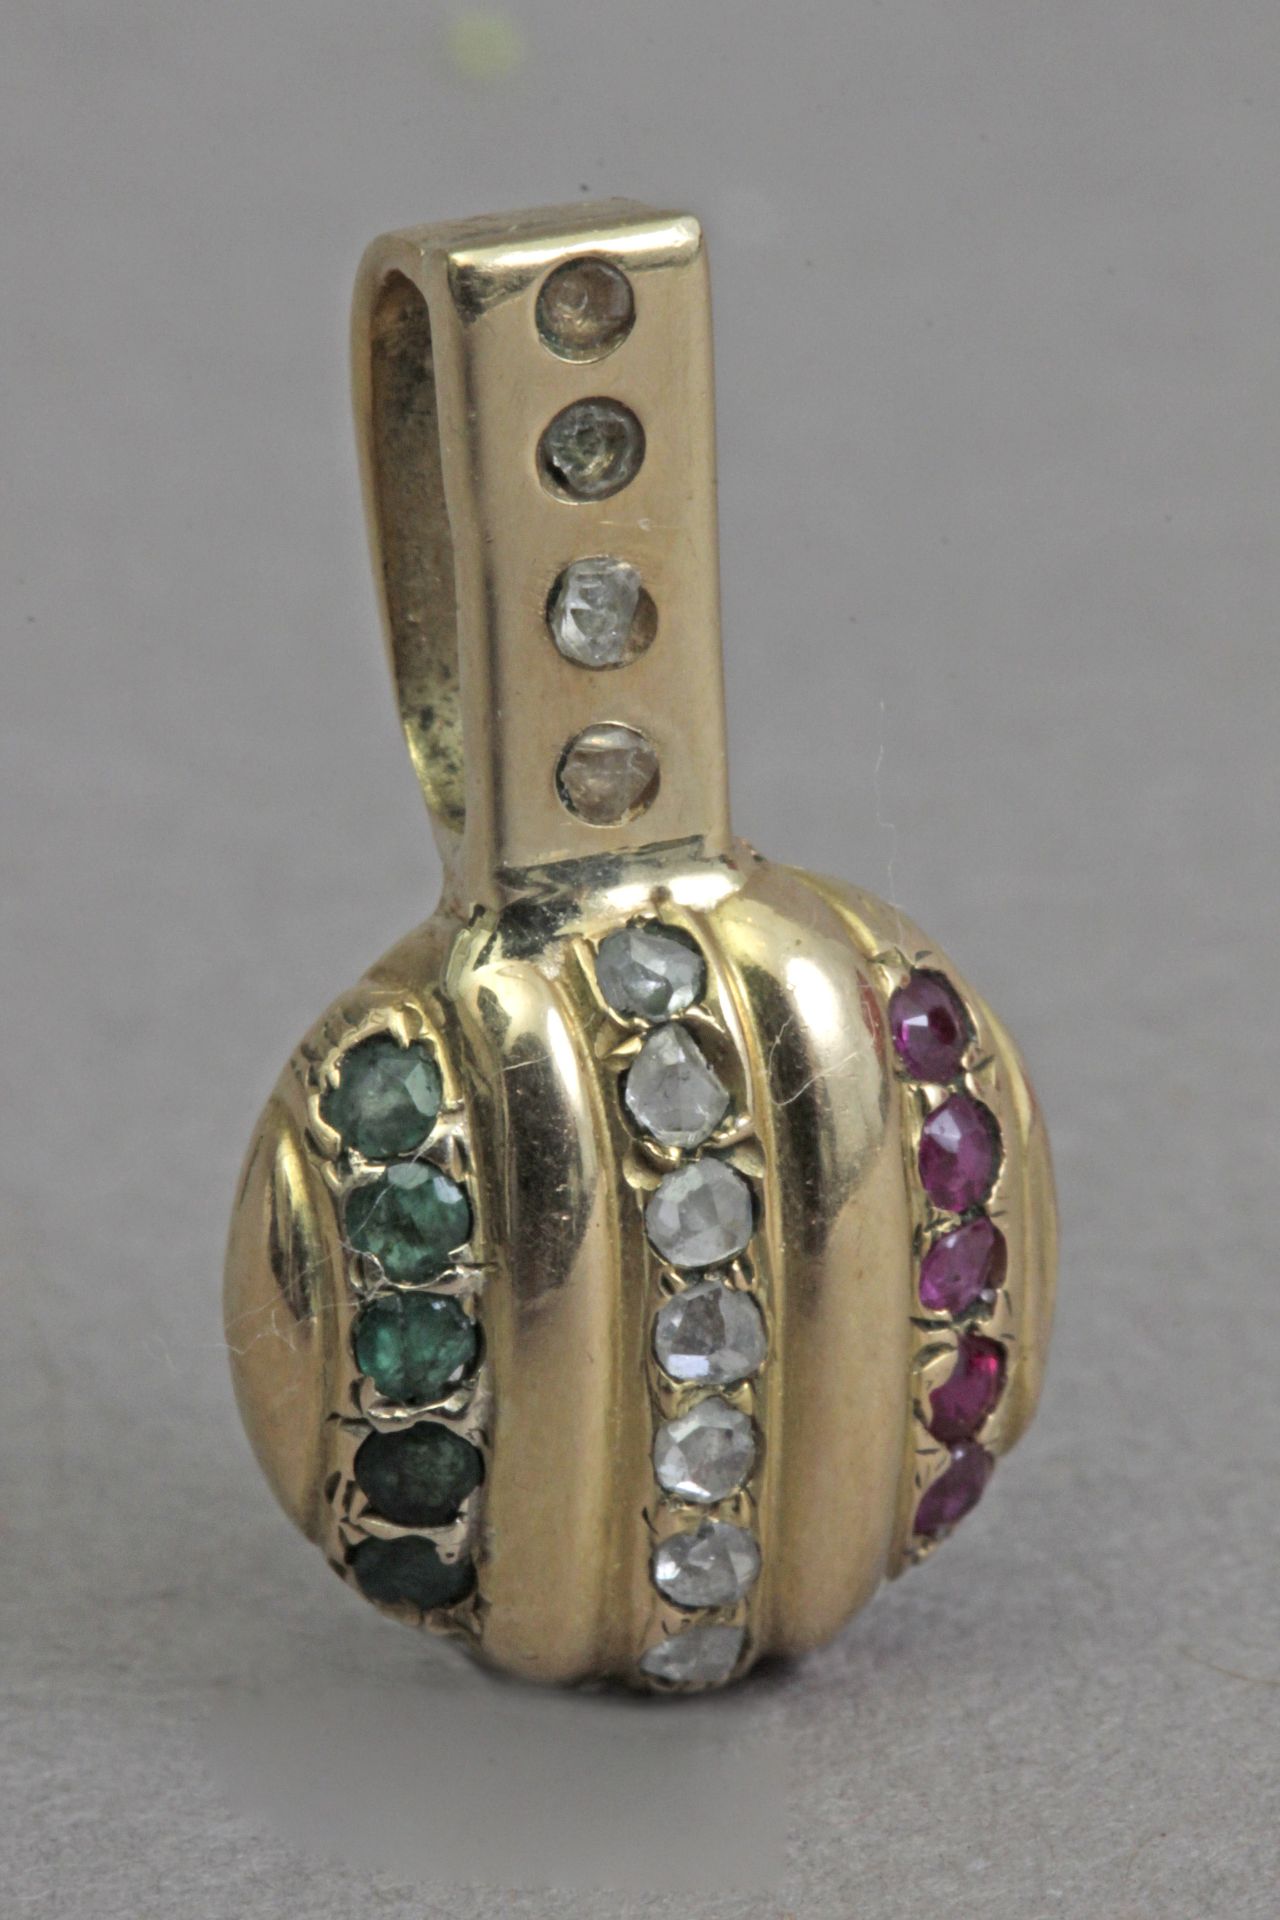 A rubies, emerald,and sapphire pendant with an 18k. yellow gold setting